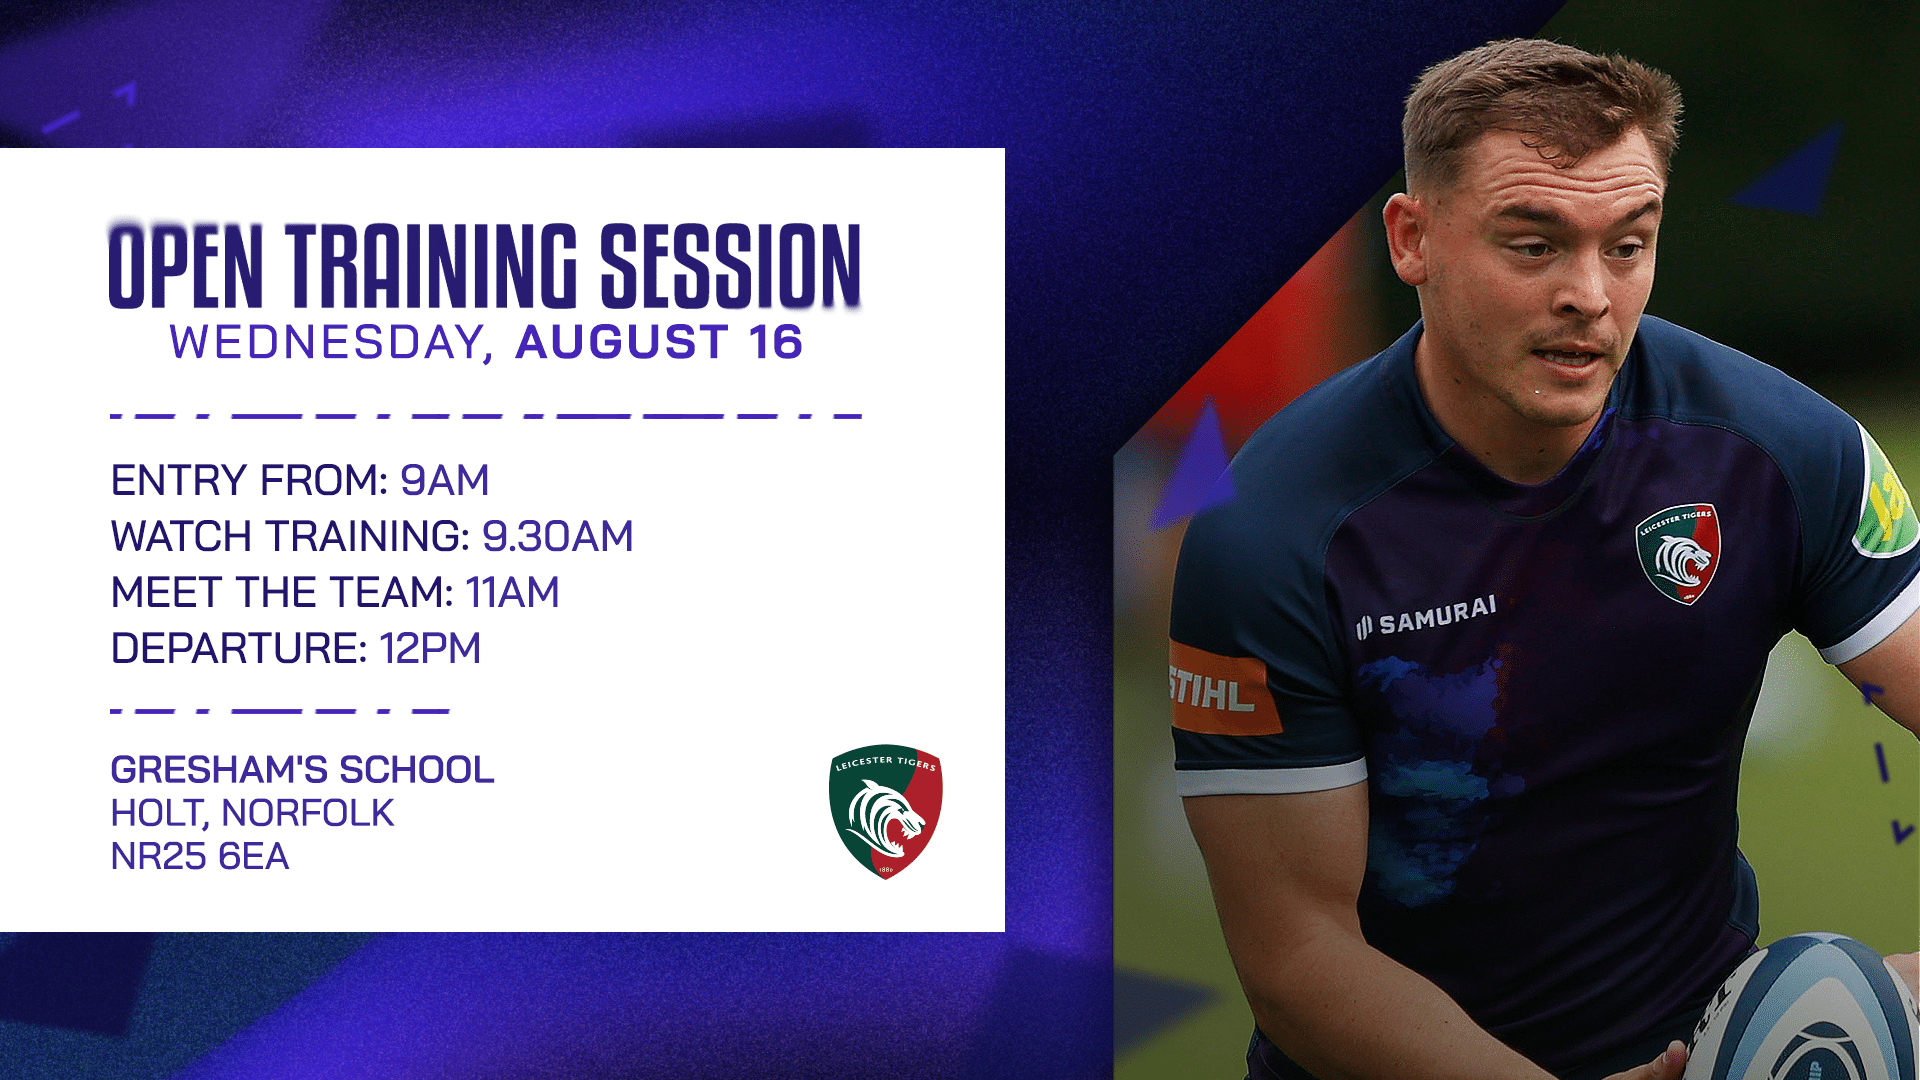 Leicester Tigers Open Training Session at Greshams